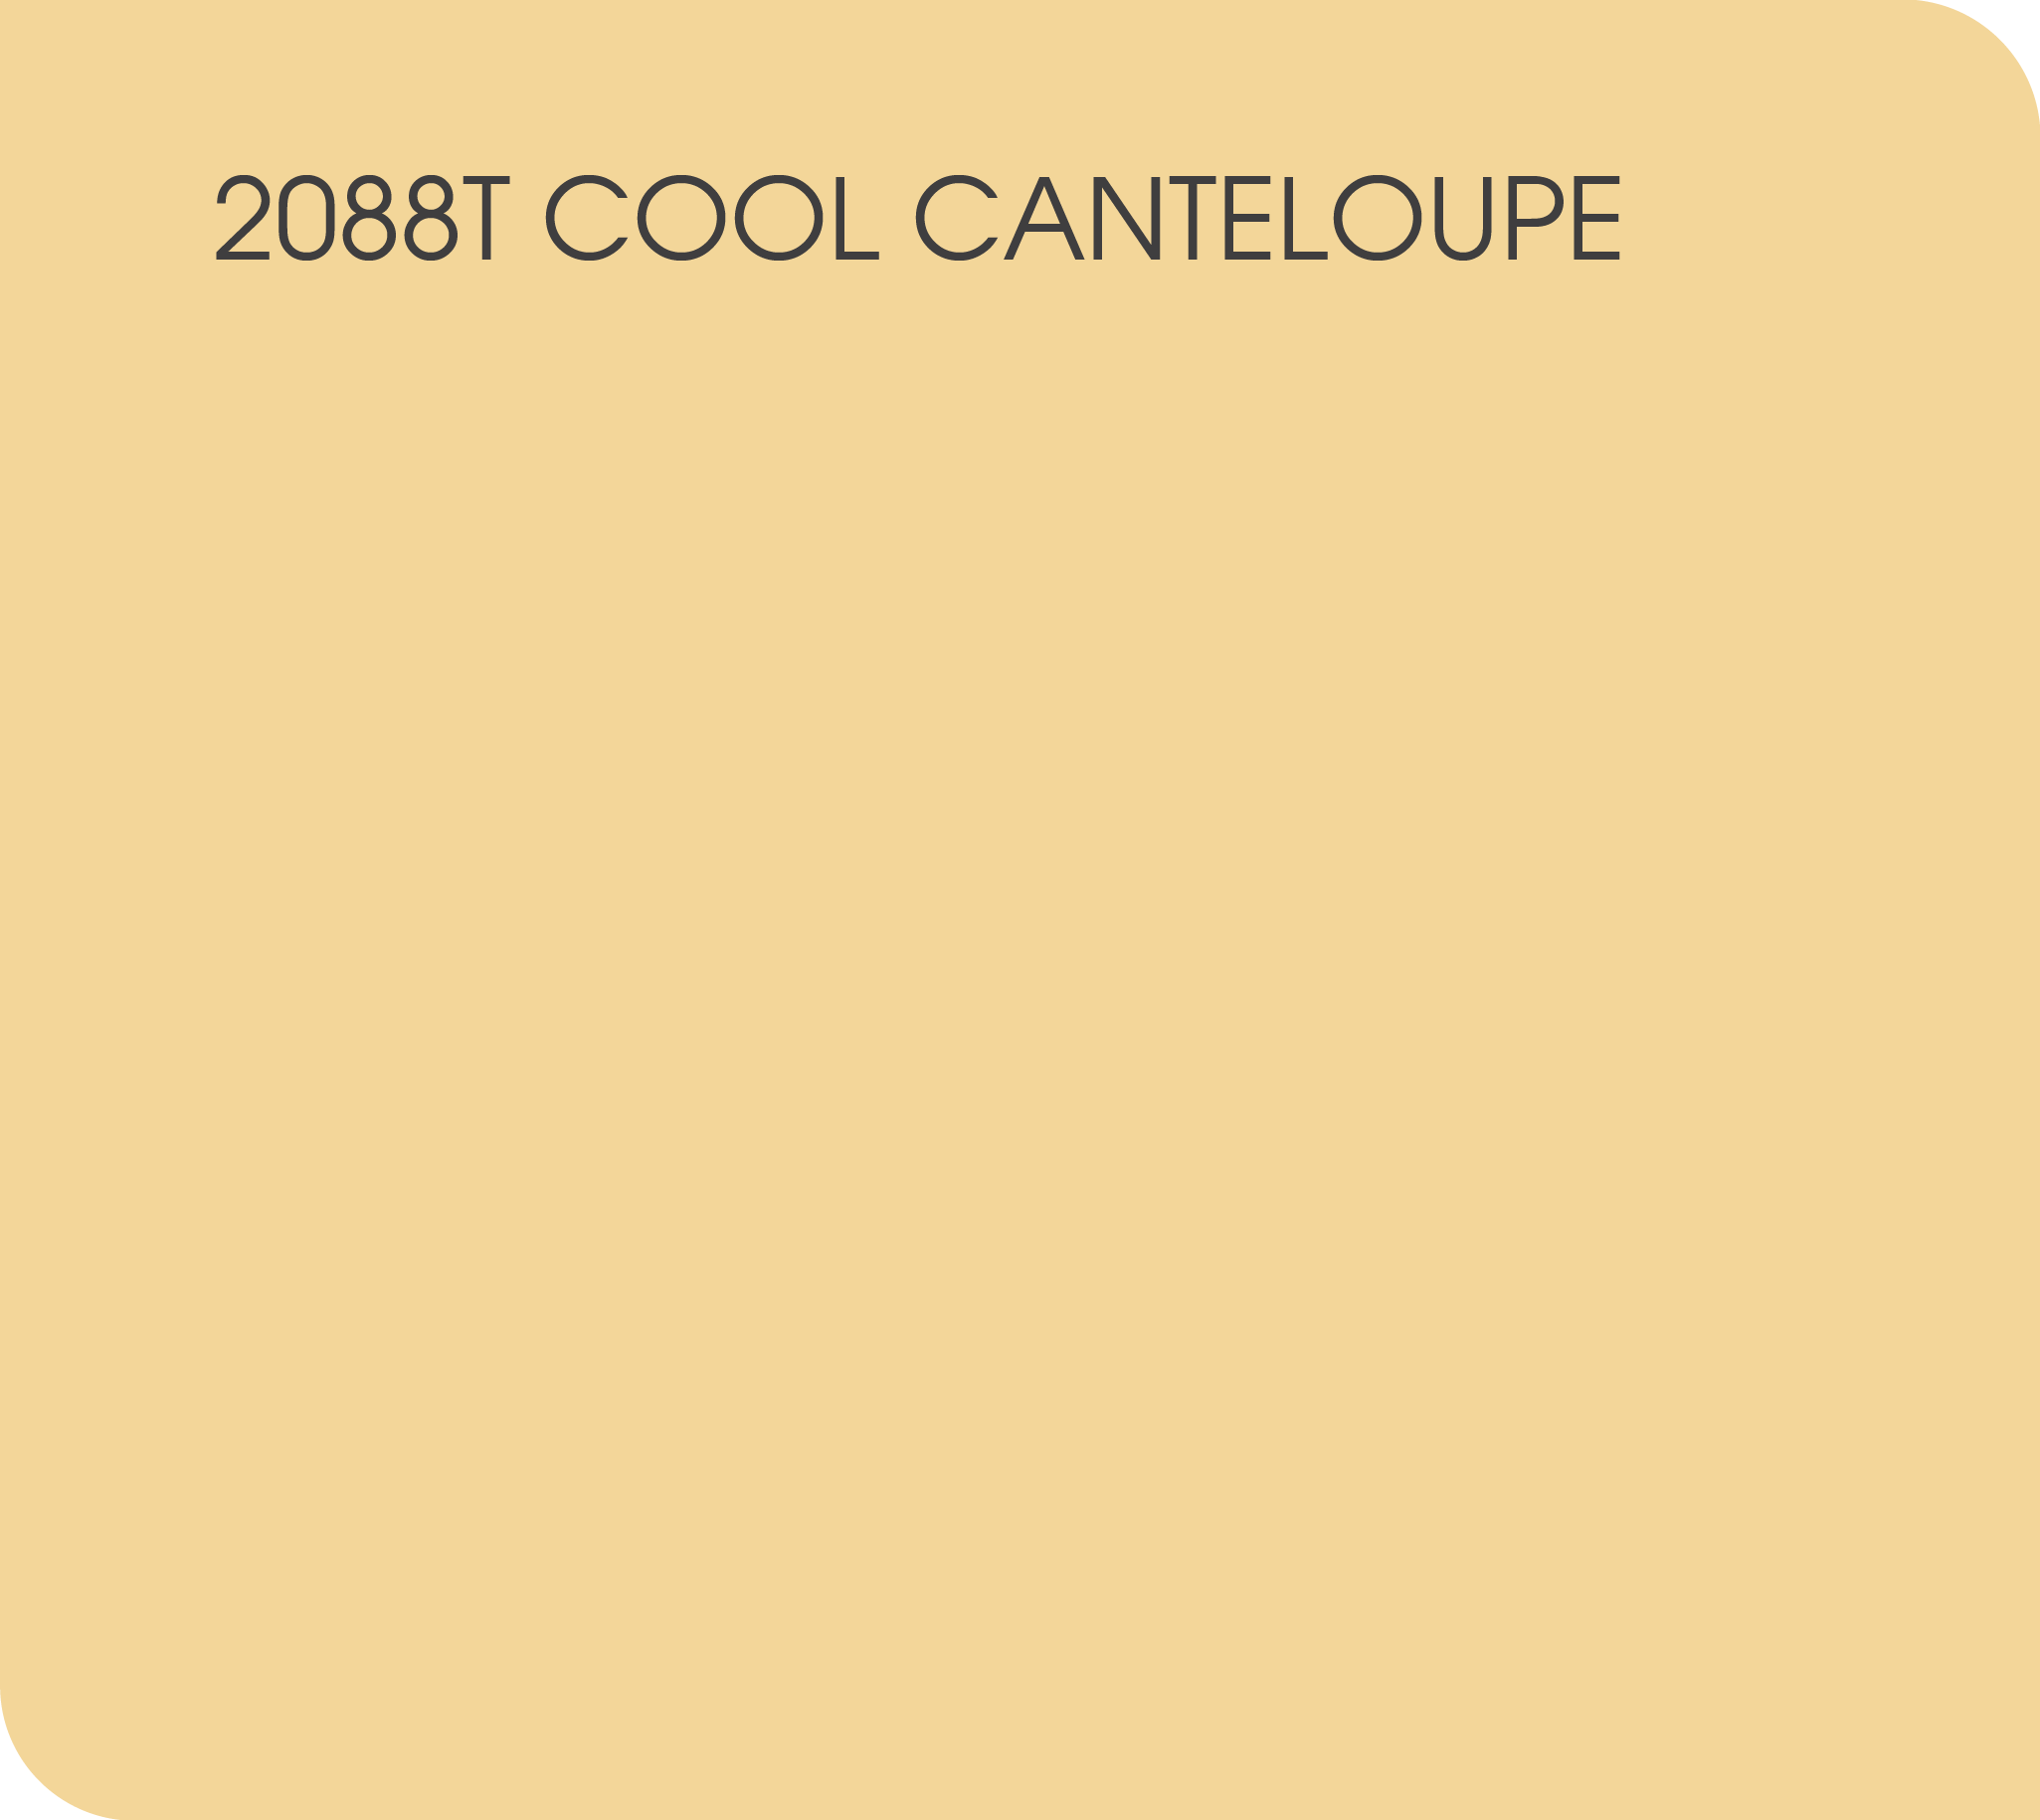 cool canteloupe 2088T